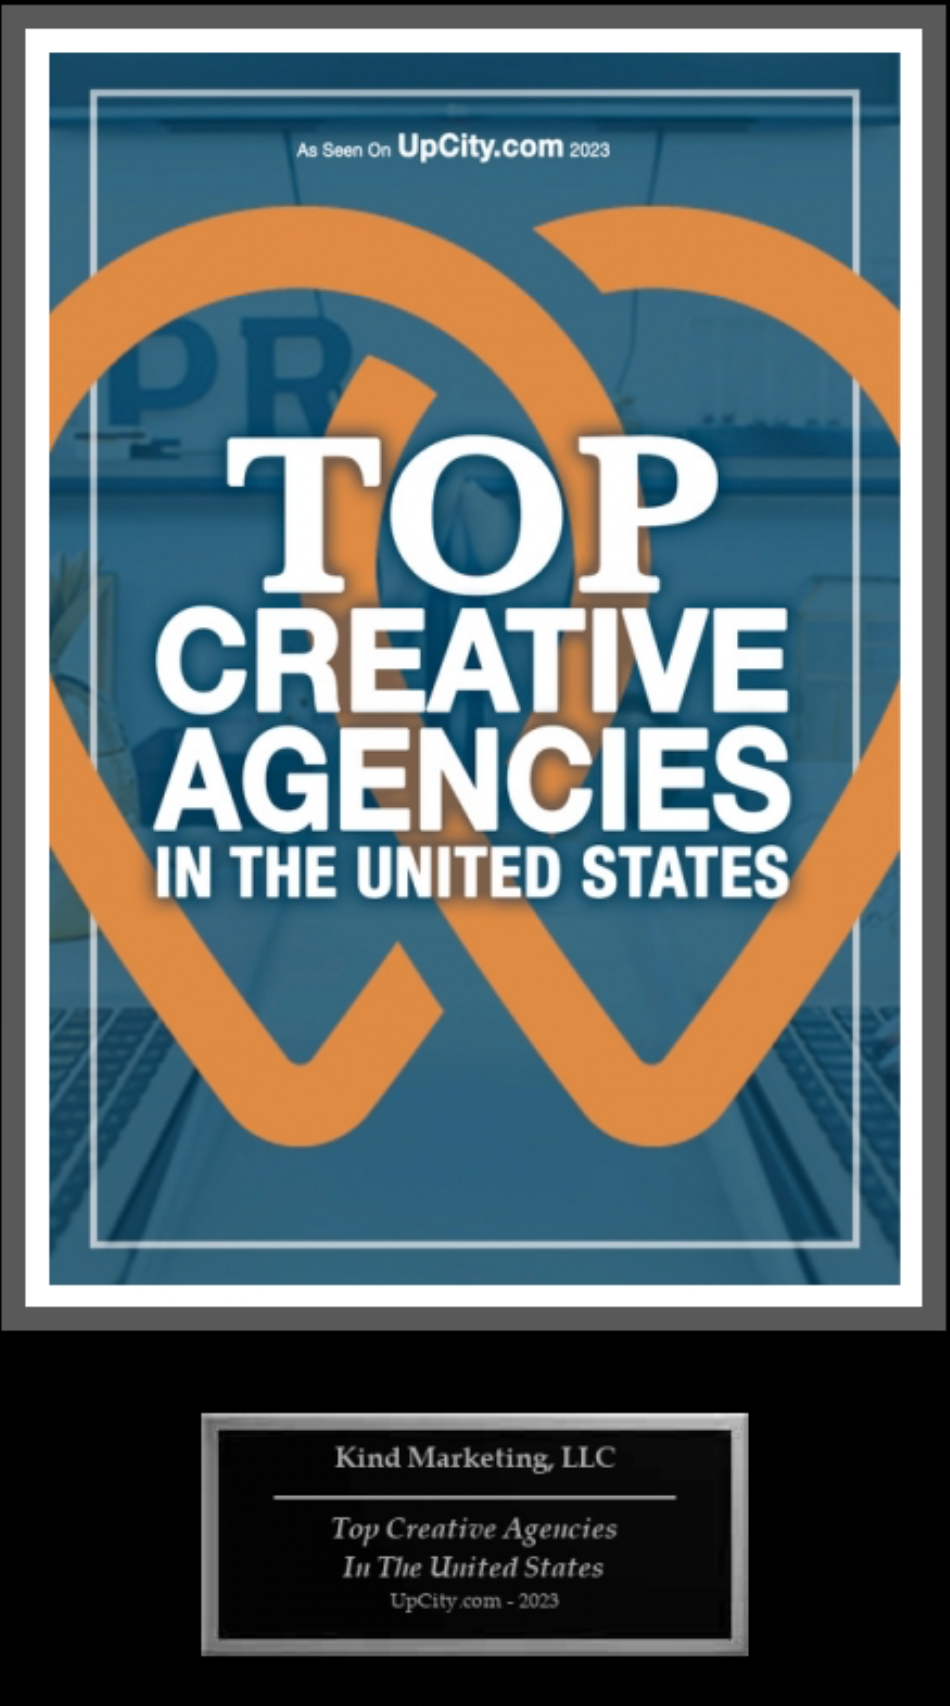 Kind Marketing™ named Top Creative Agencies in the United States